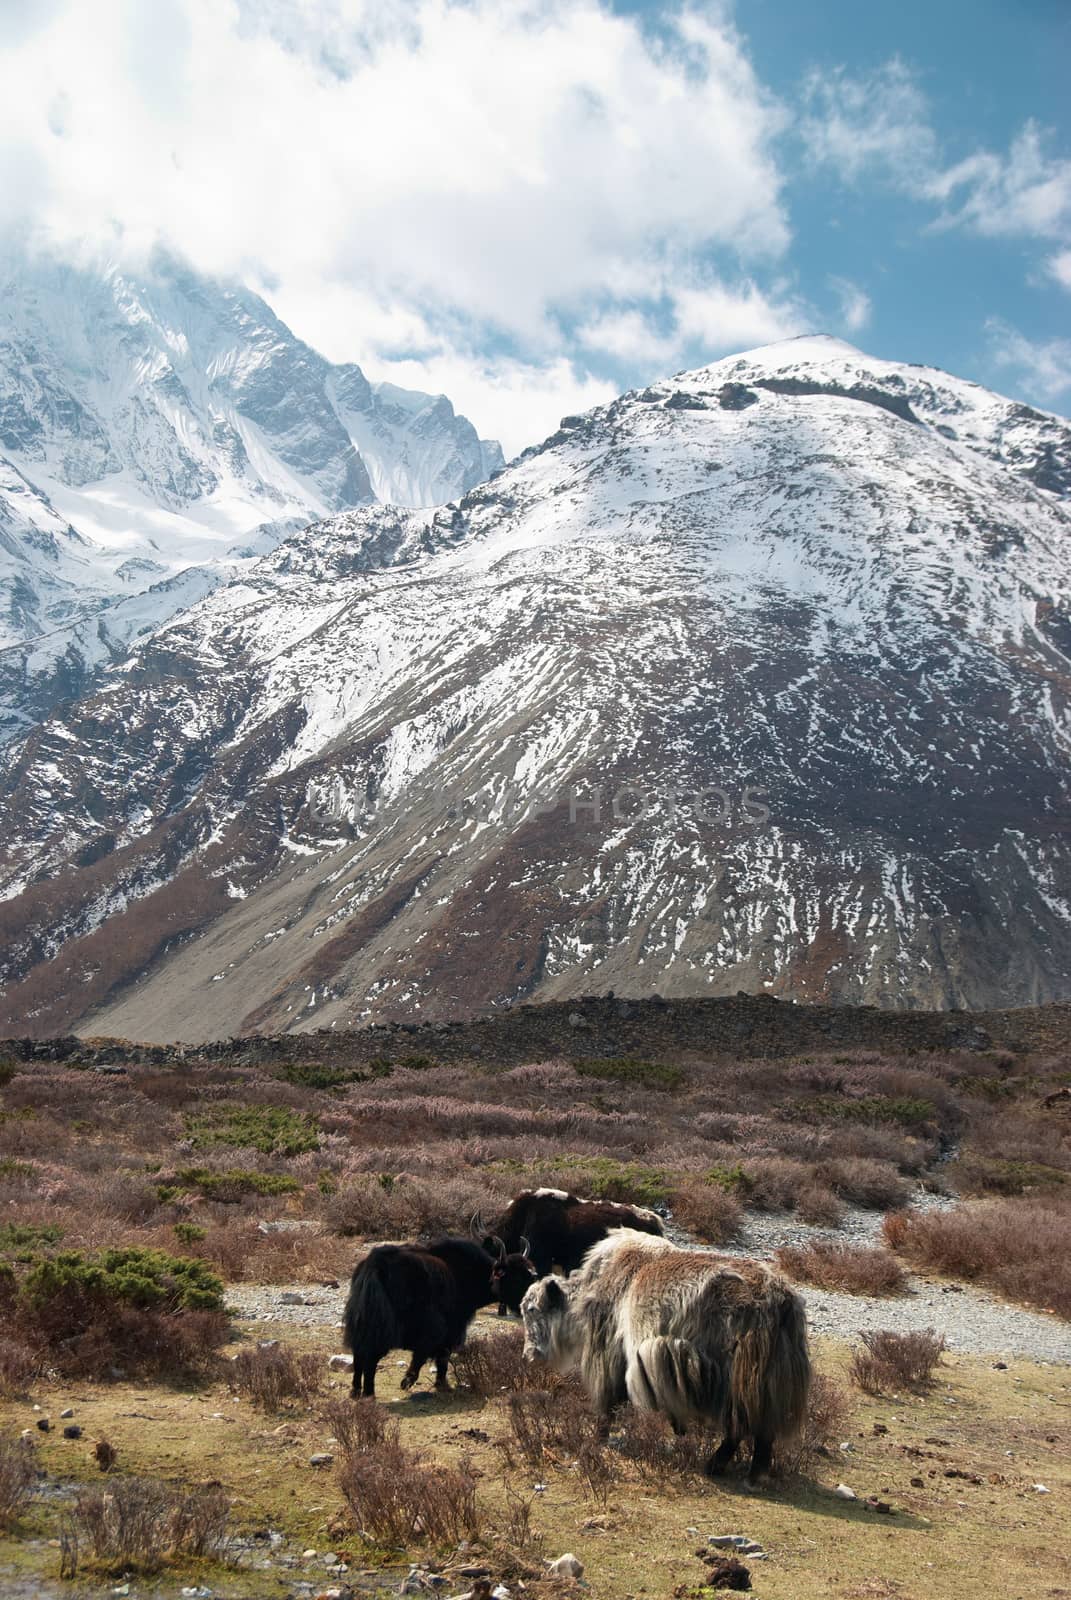 Tibetan landscape with yaks and snow-covered mountains.